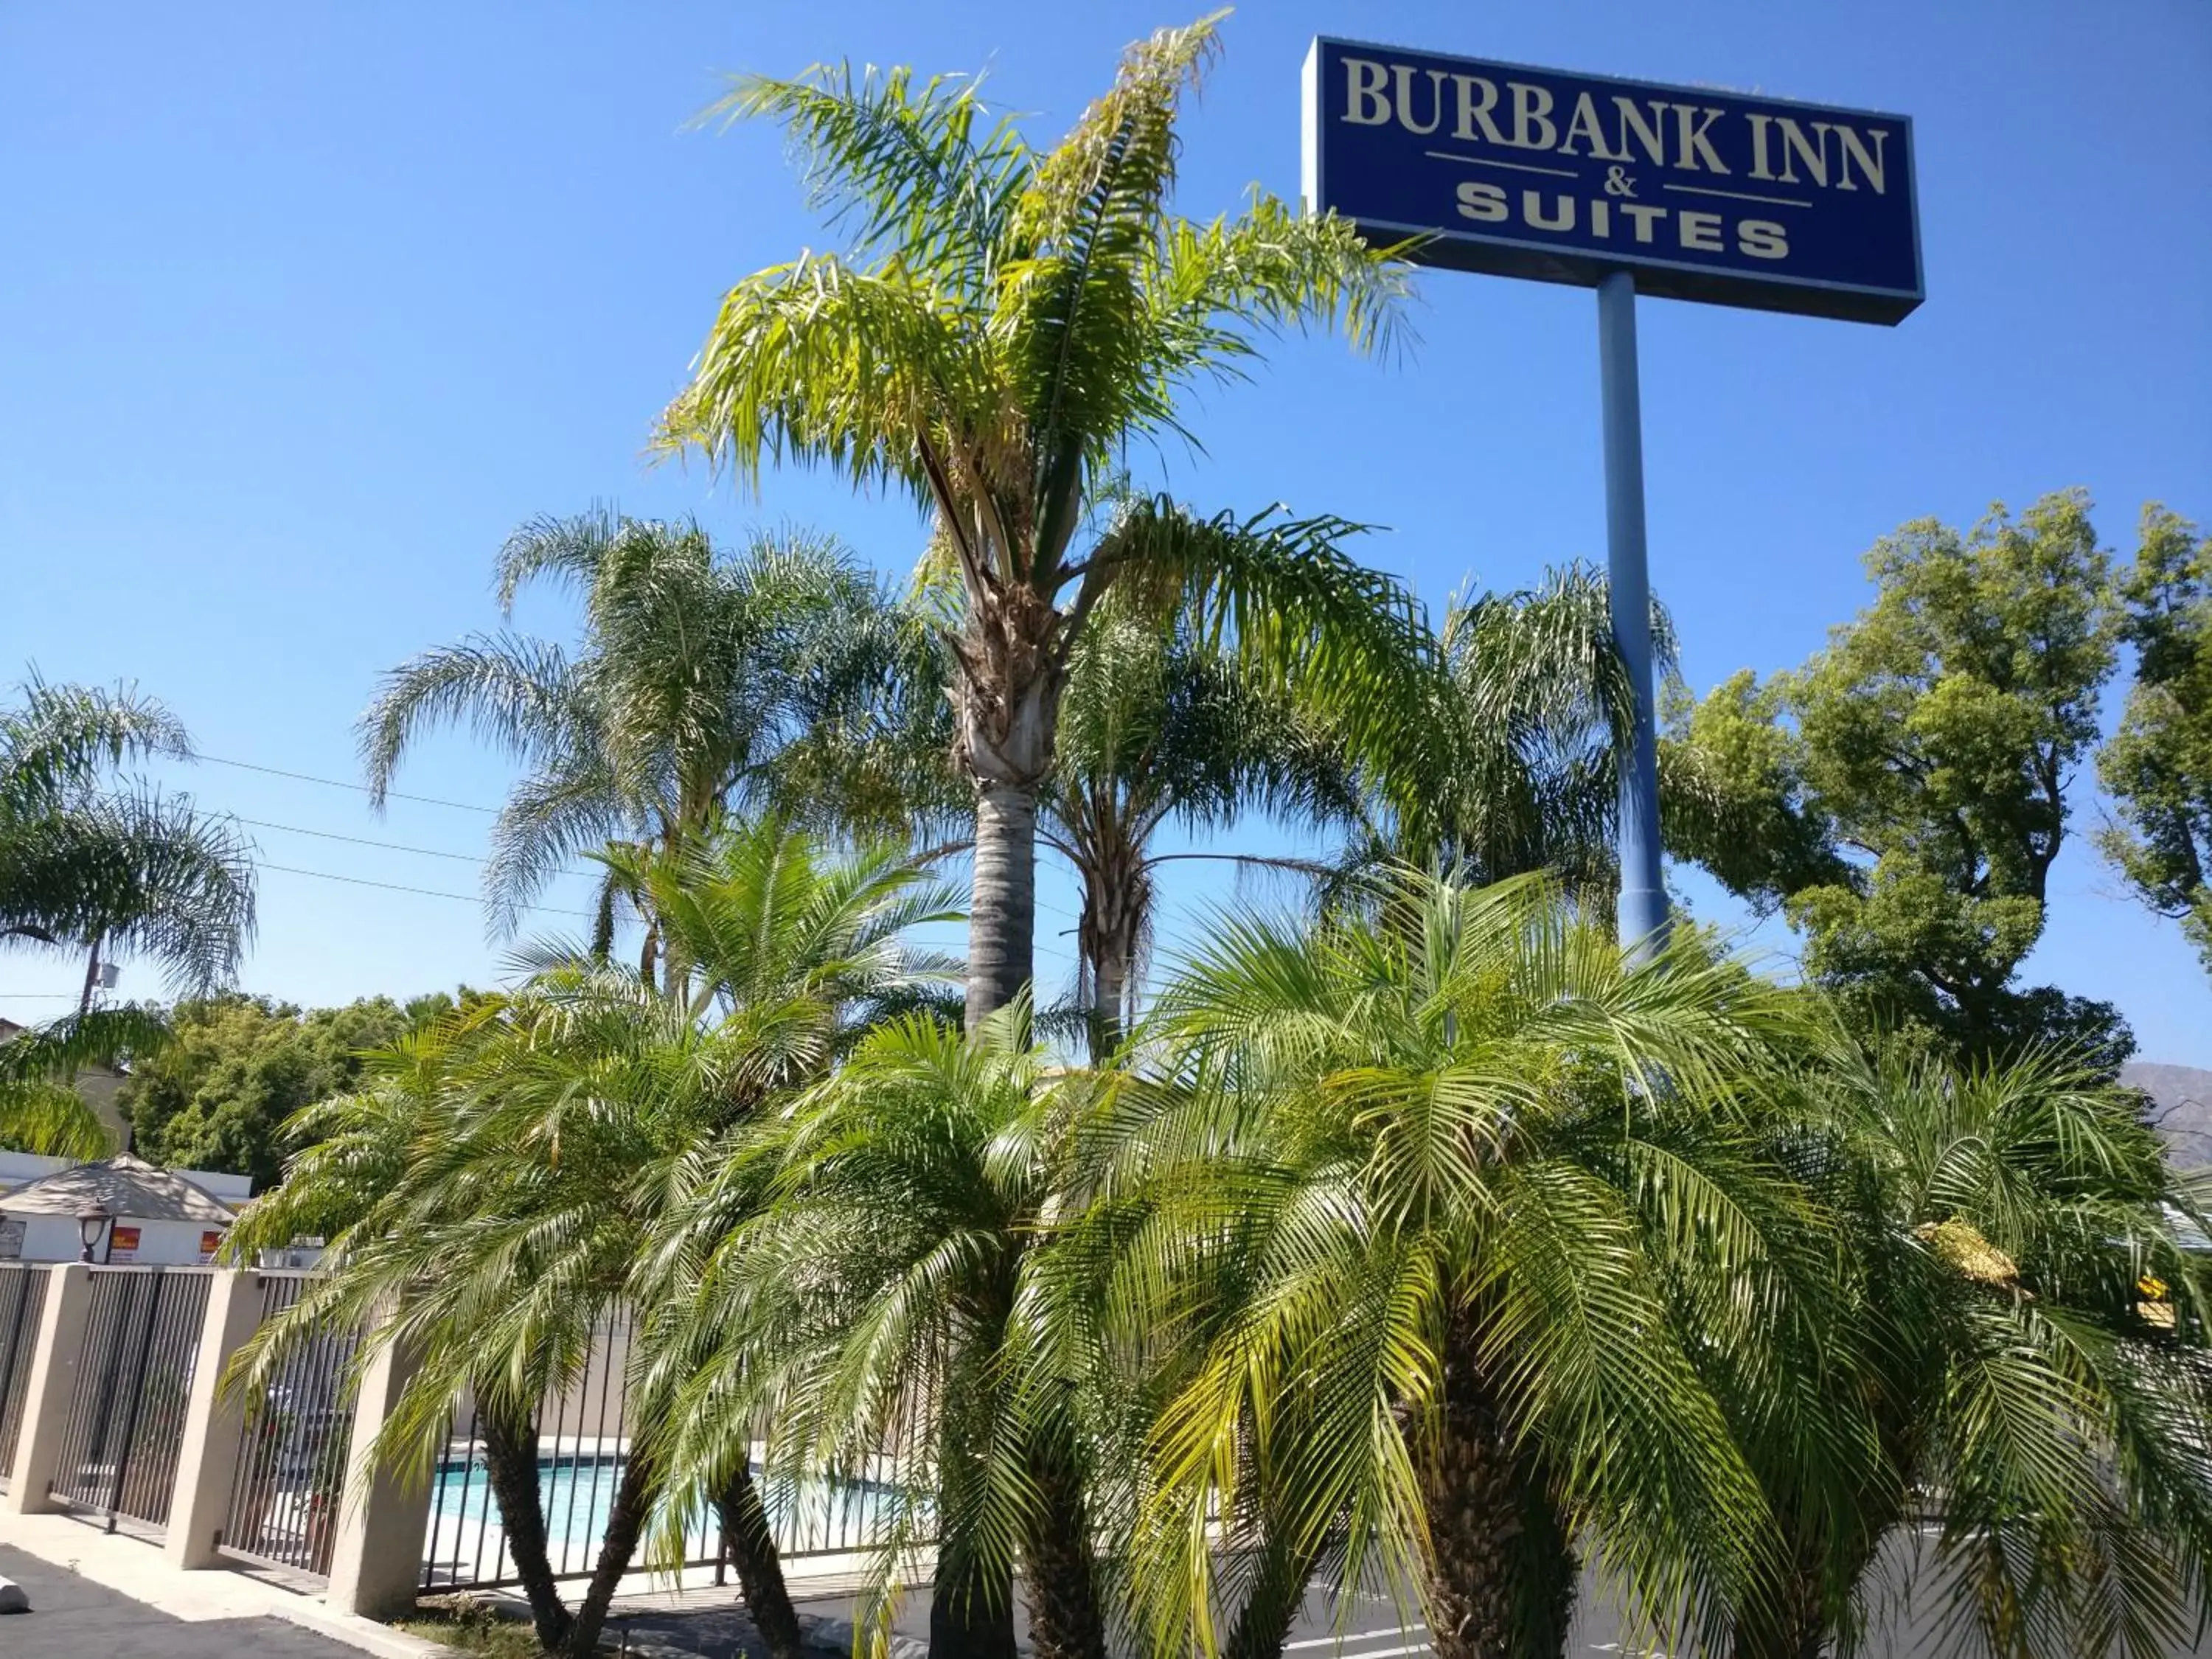 Property logo or sign in Burbank Inn and Suites